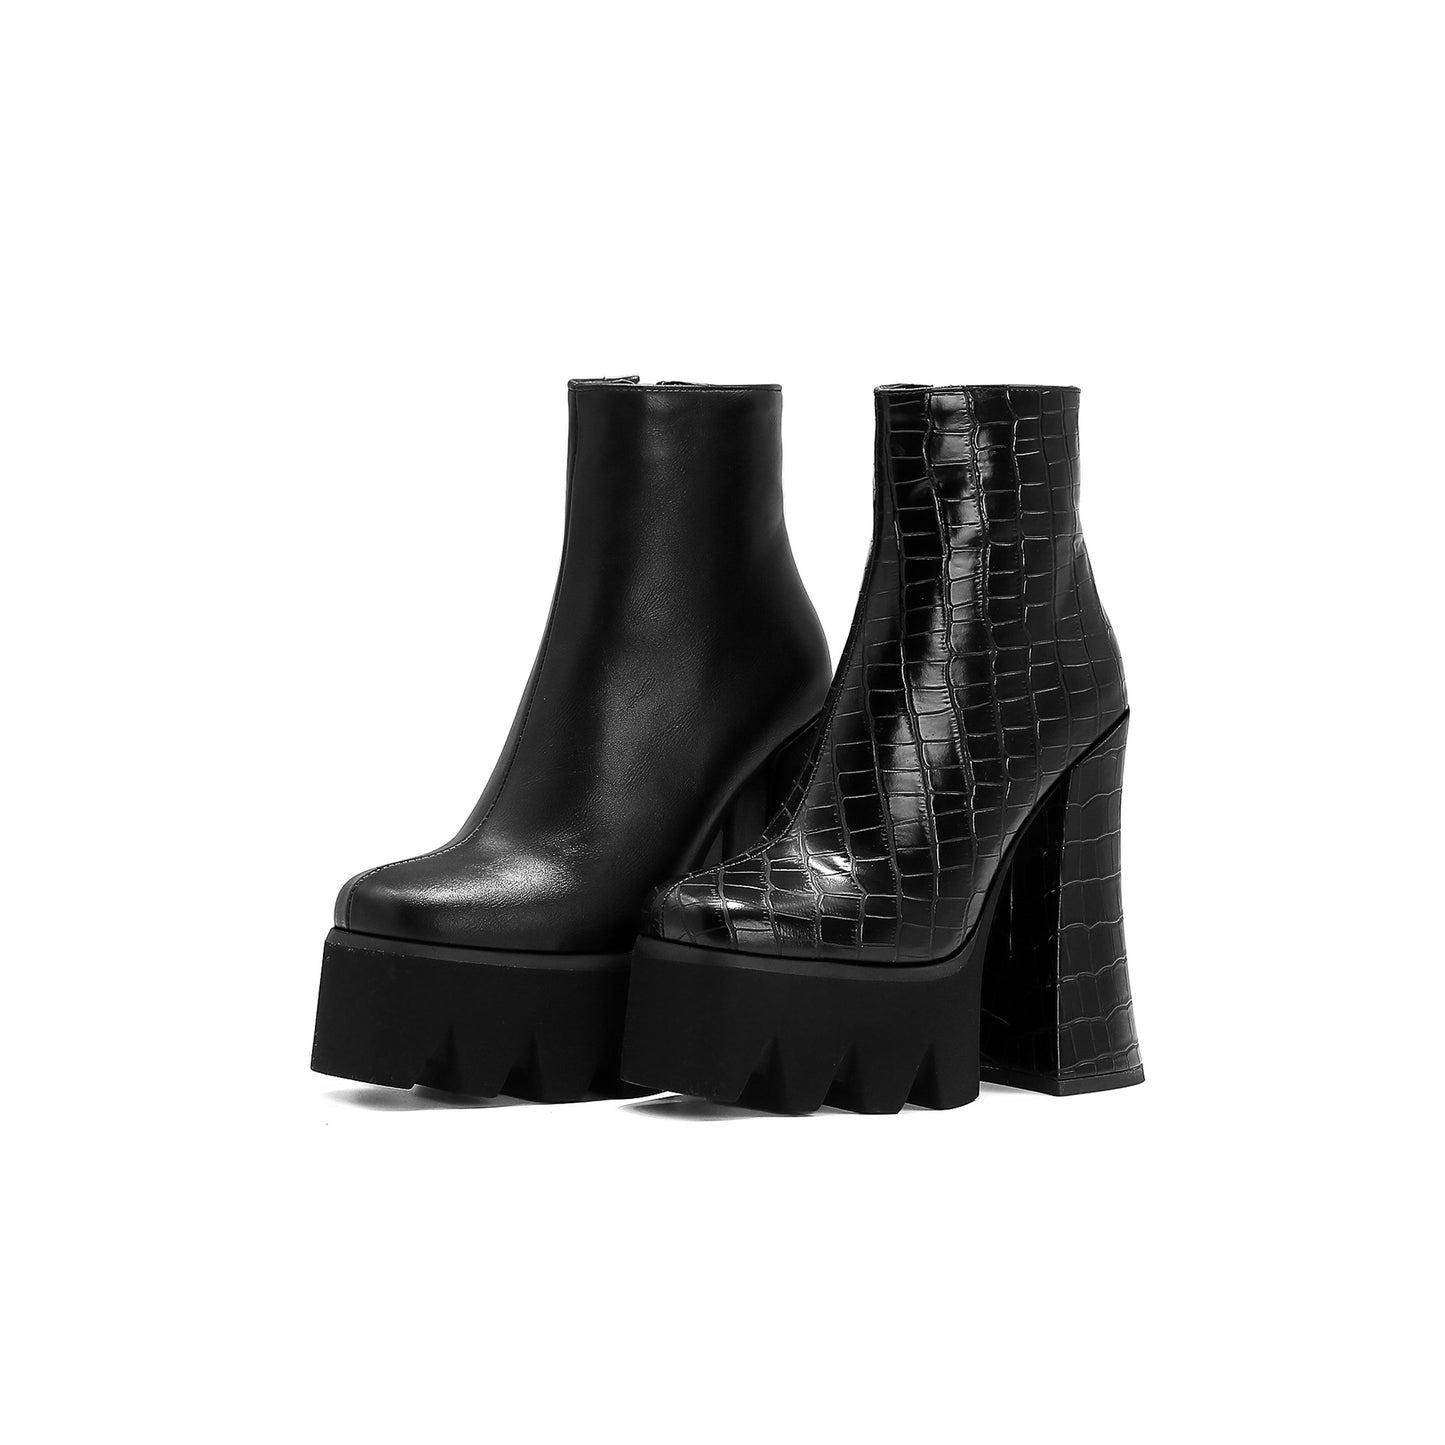 High-heeled Platform Large Size Women's Boots  Heeled Boots Thecurvestory